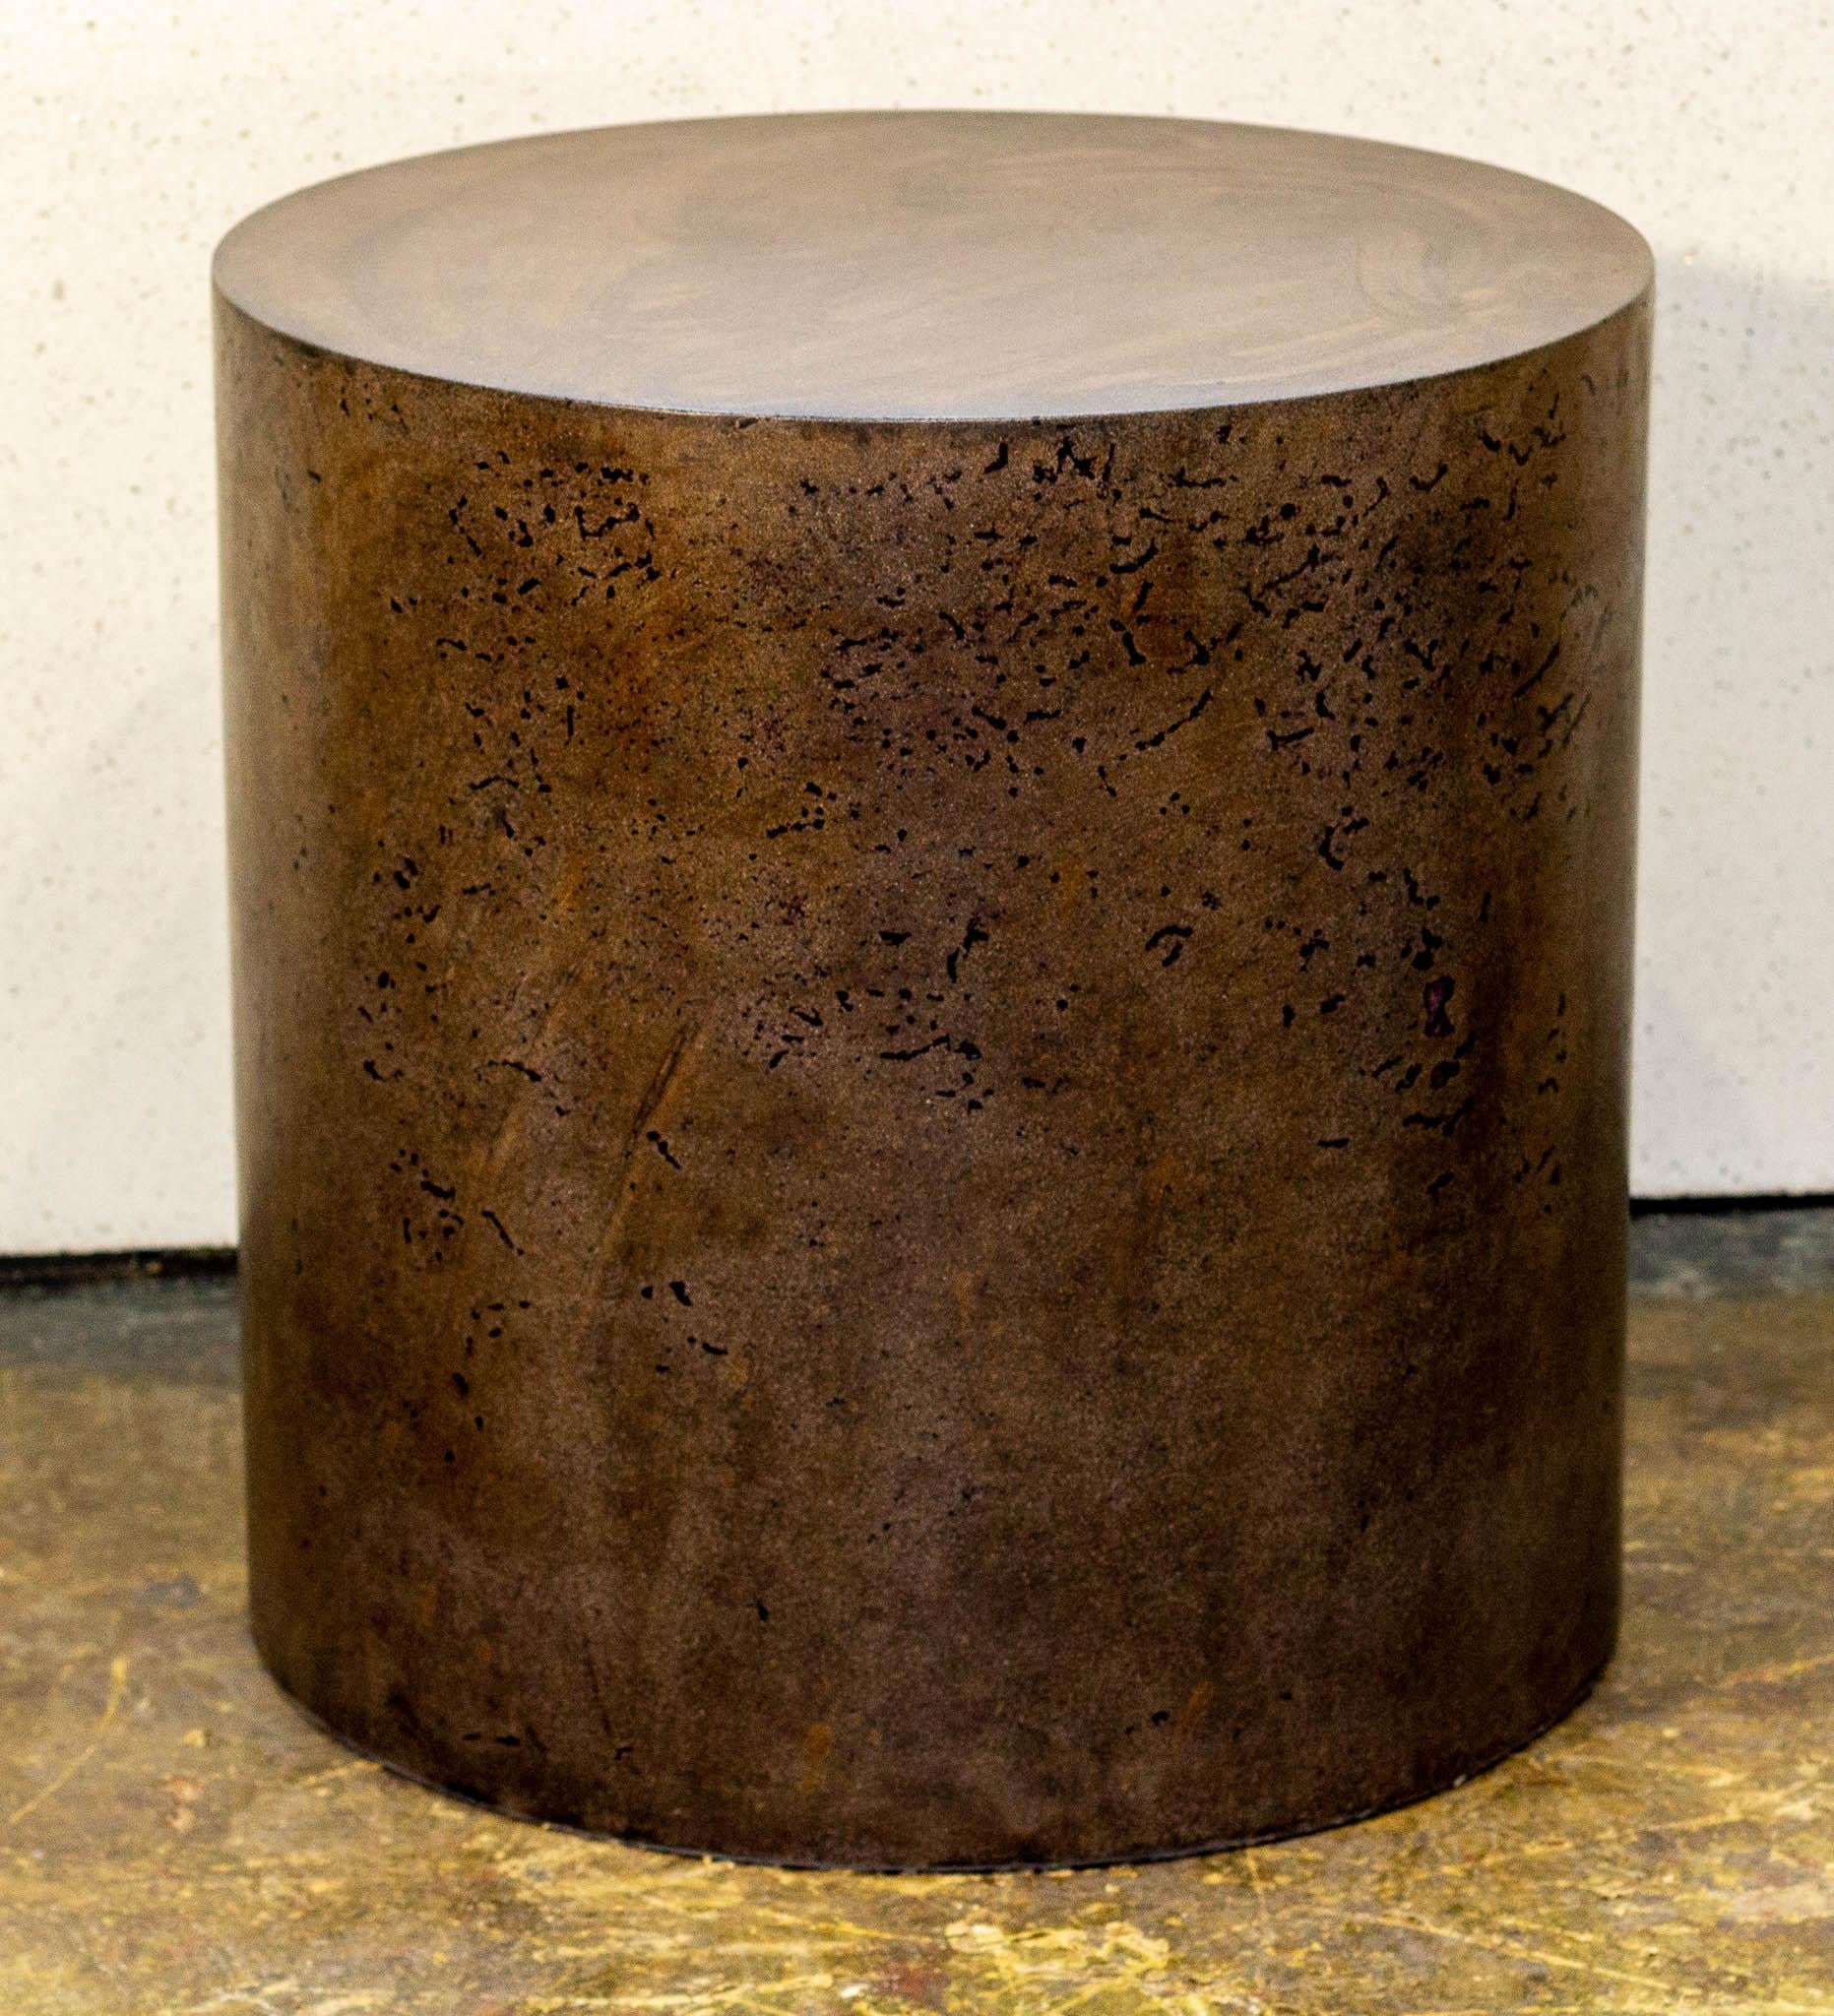 A deep rich chocolatey espresso concrete cylinder that's absolutely yummy. Handmade concrete cylinder with subtle texture and flow throughout. Crafted for only the finest raw materials and sealed with our ultra high performance hybrid polyurethane